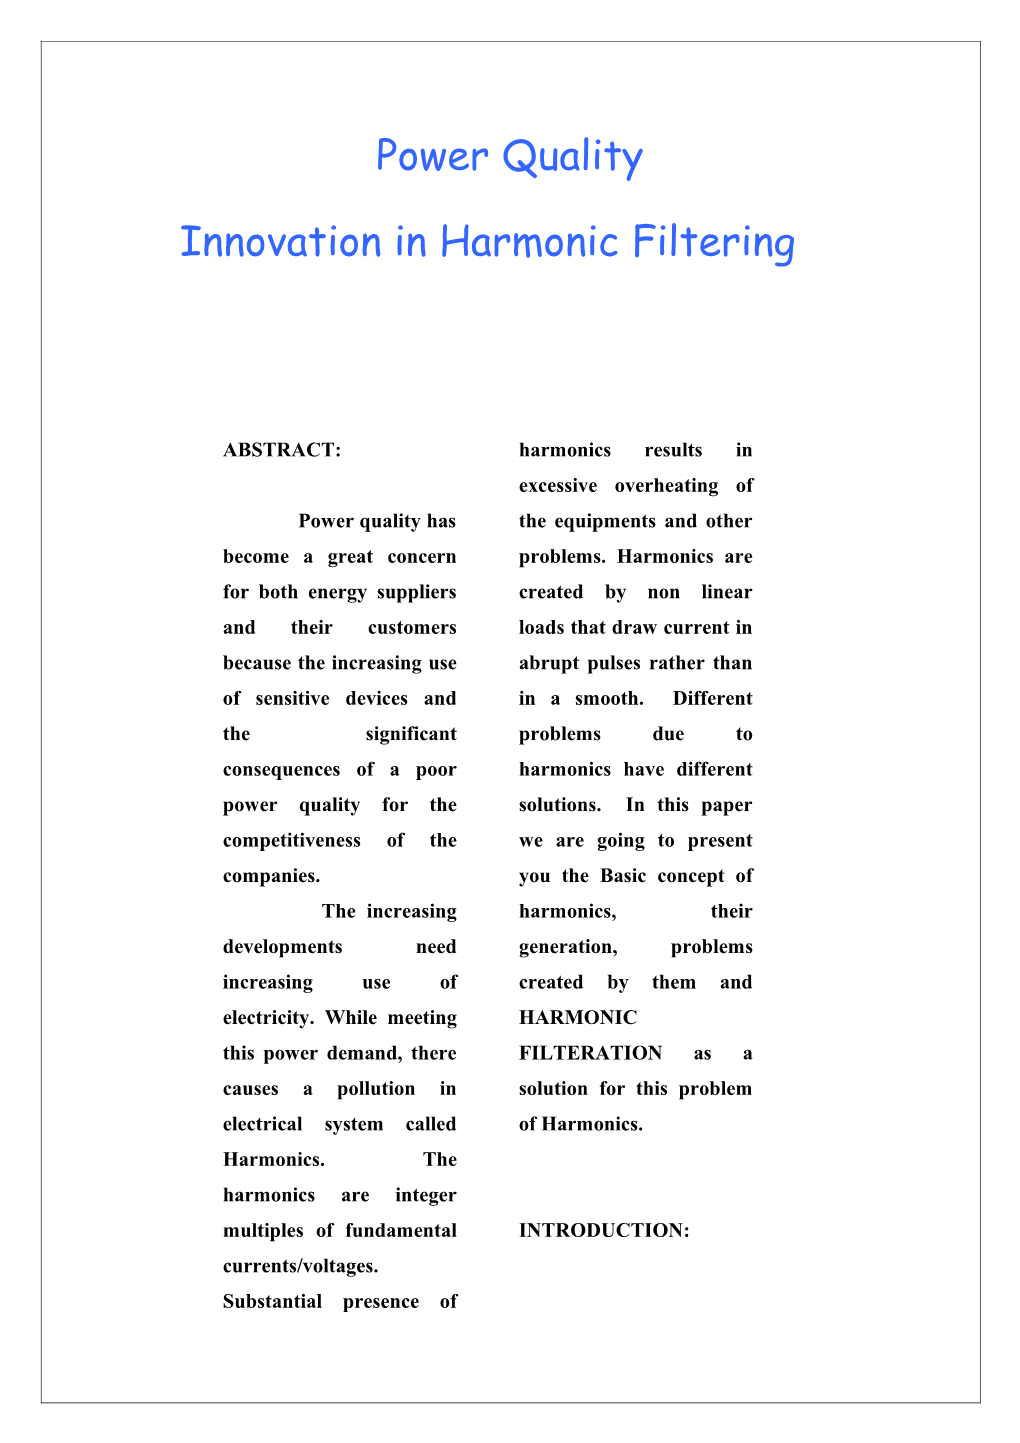 Power Quality: Innovation in Harmonic Filtering